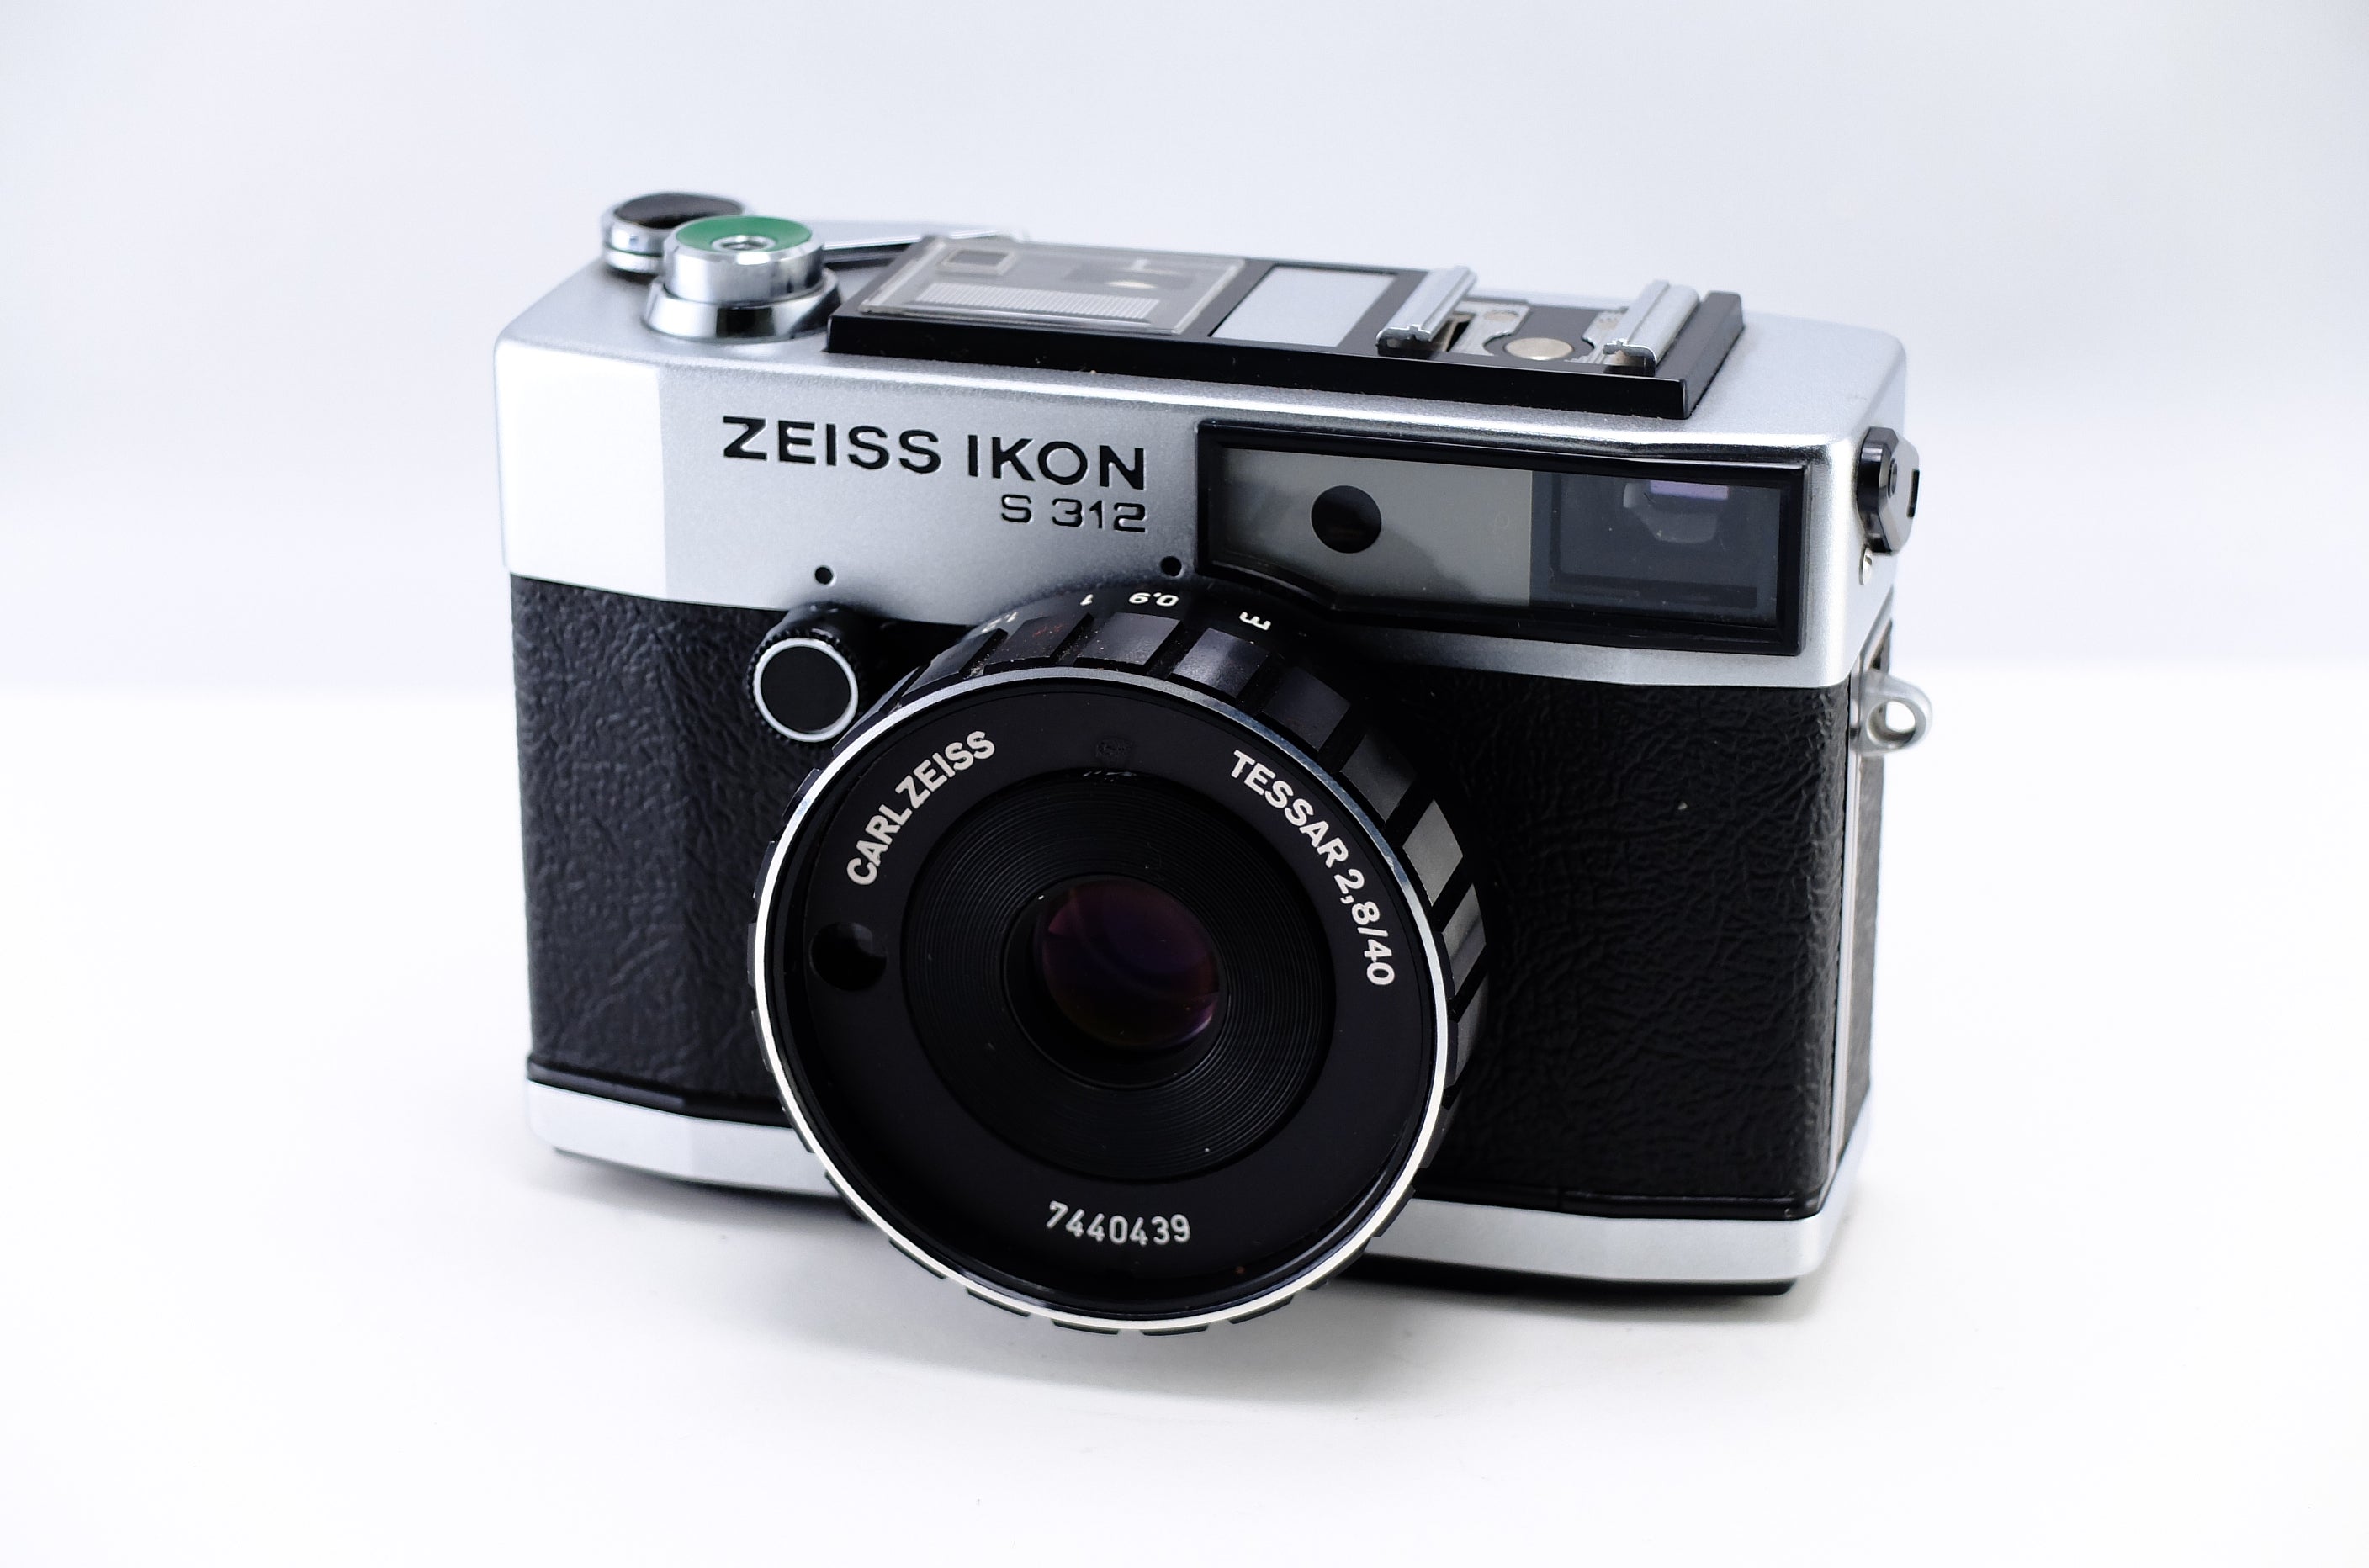 【Zeiss Ikon】S 312 ケース付き [1360716184627]